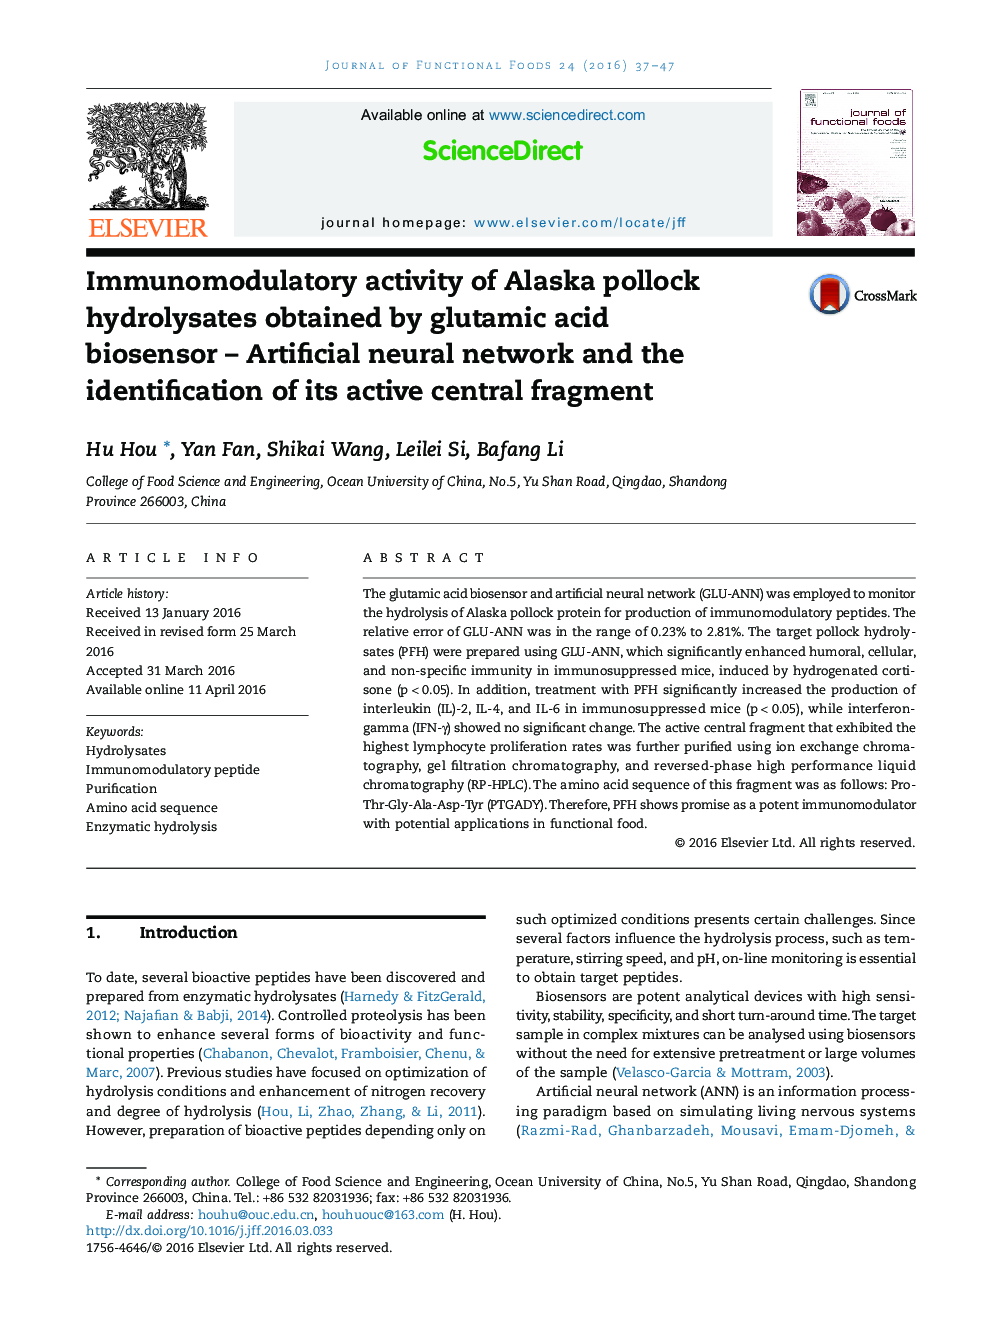 Immunomodulatory activity of Alaska pollock hydrolysates obtained by glutamic acid biosensor – Artificial neural network and the identification of its active central fragment